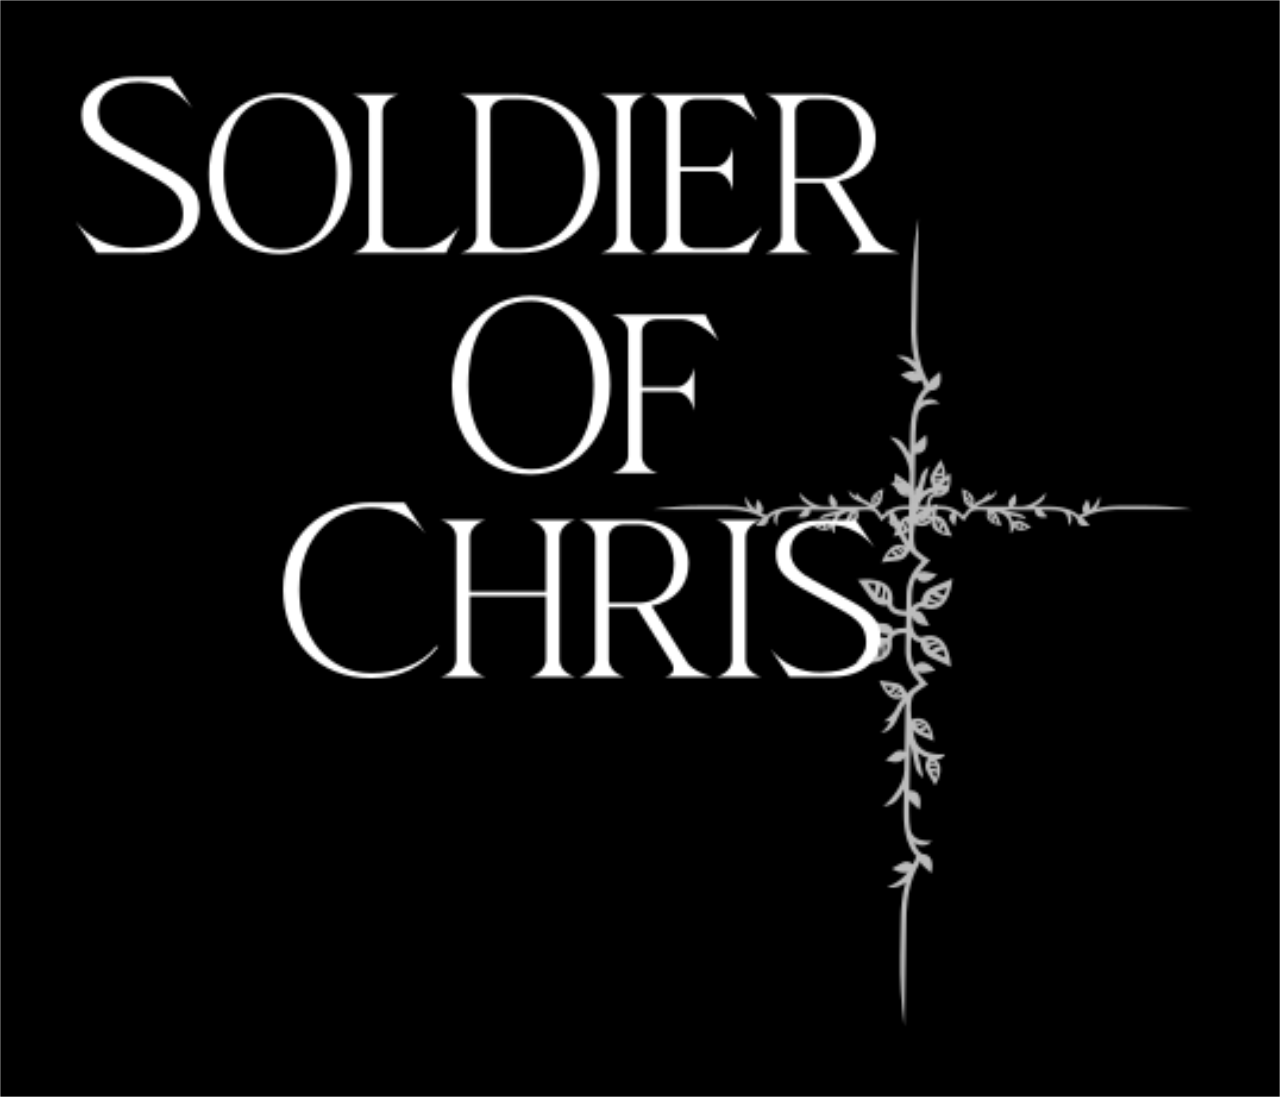 Soldier of Christ Apparel's logo